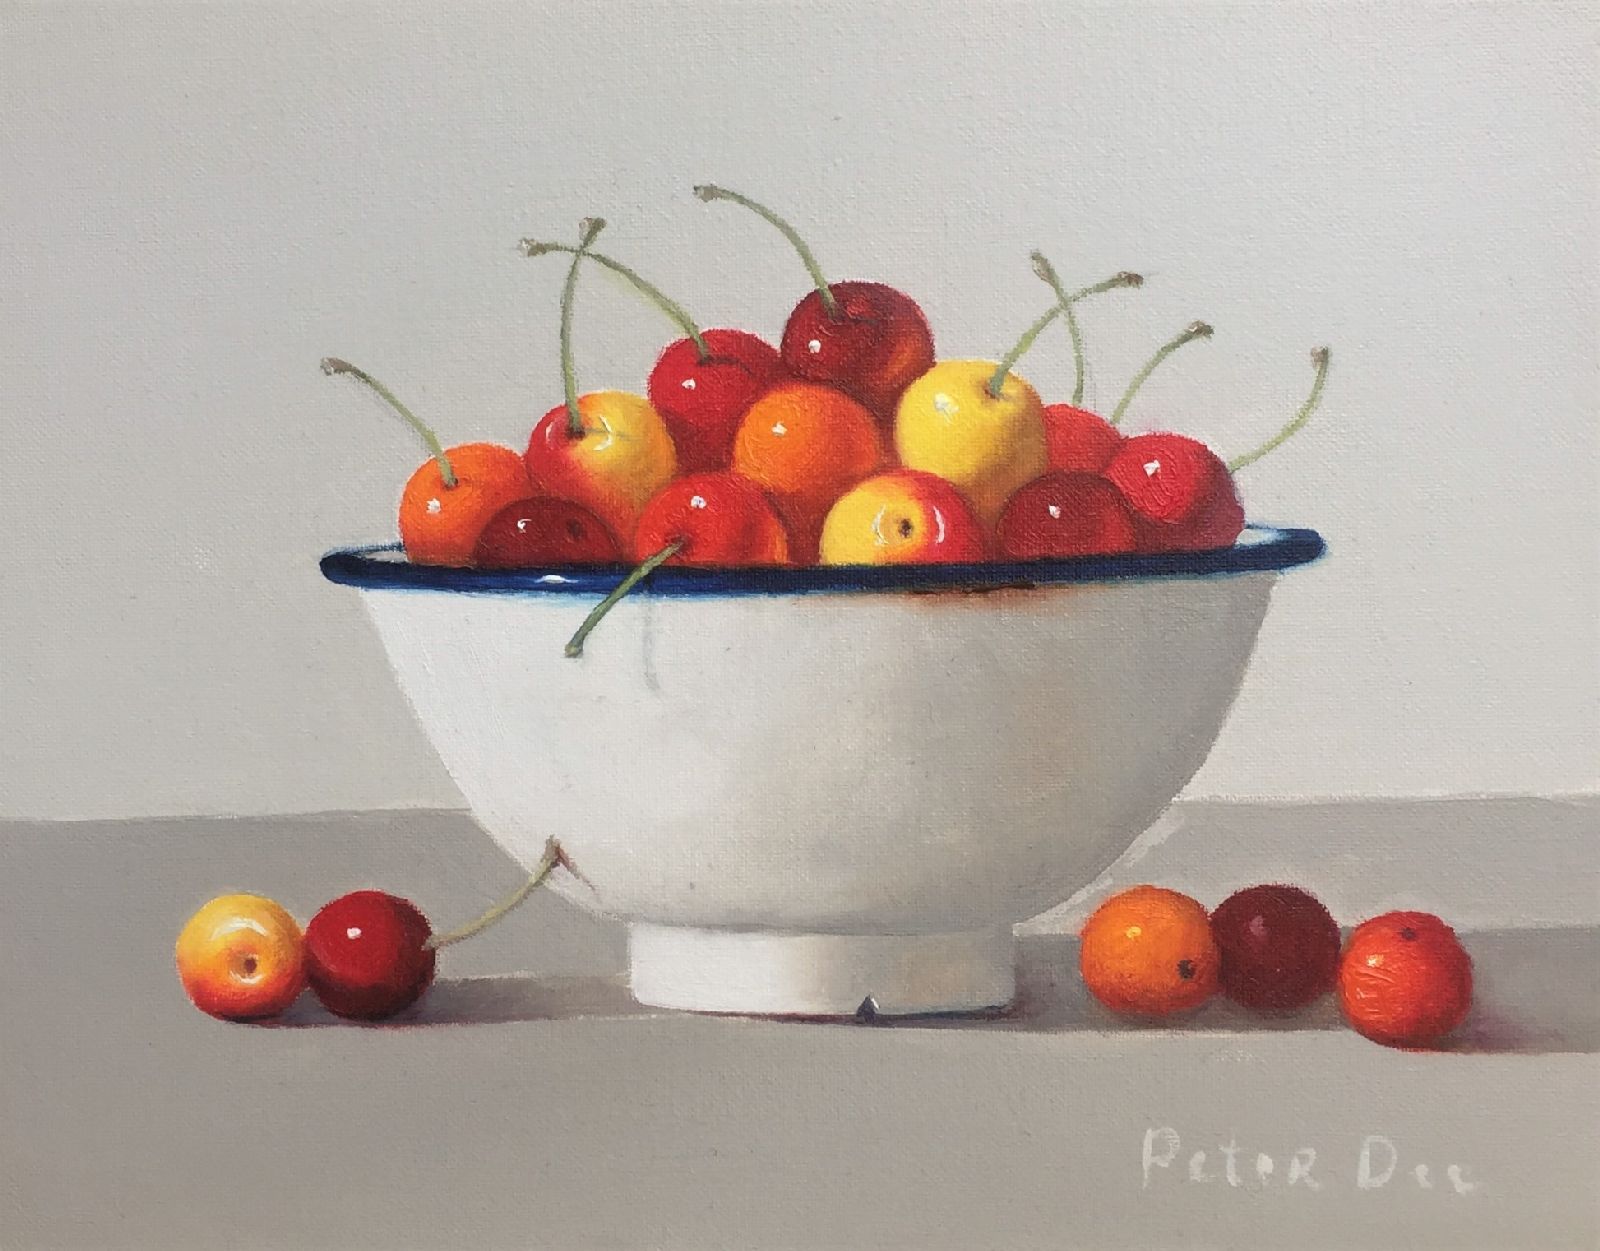 Bowl Cherries Still Life by Peter Dee